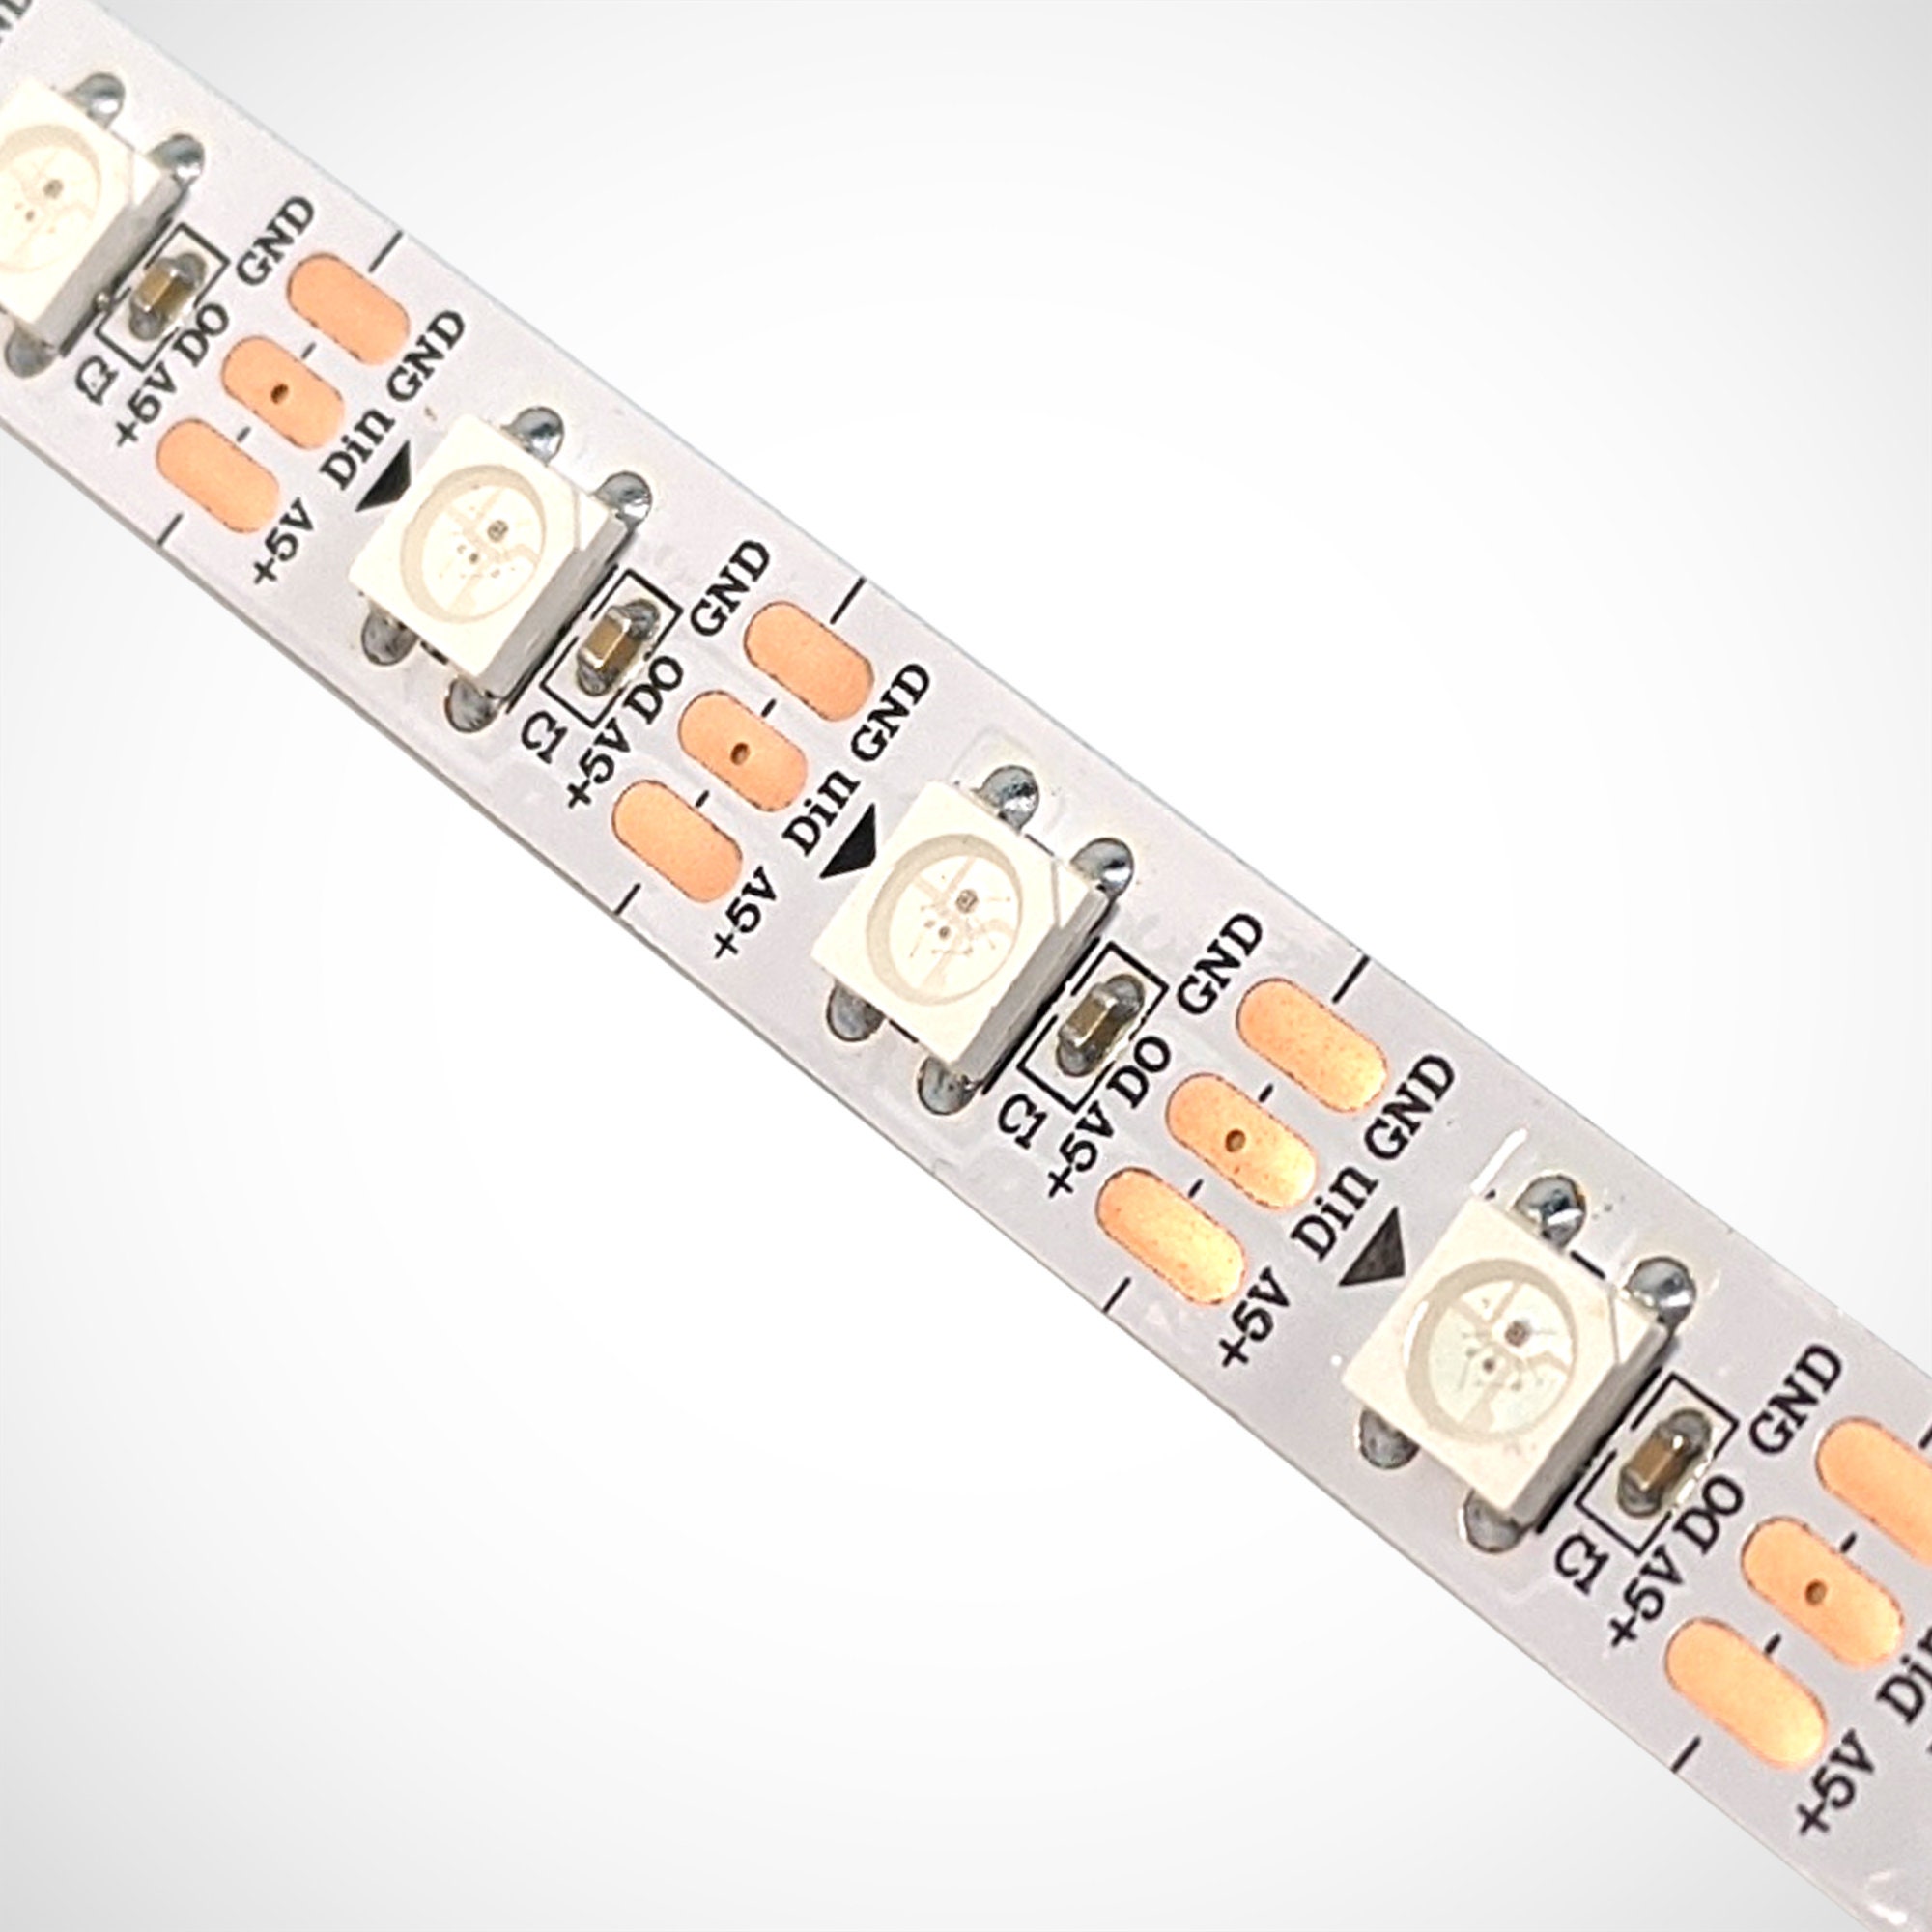 Battery-Operated Flexible LED Light Strip